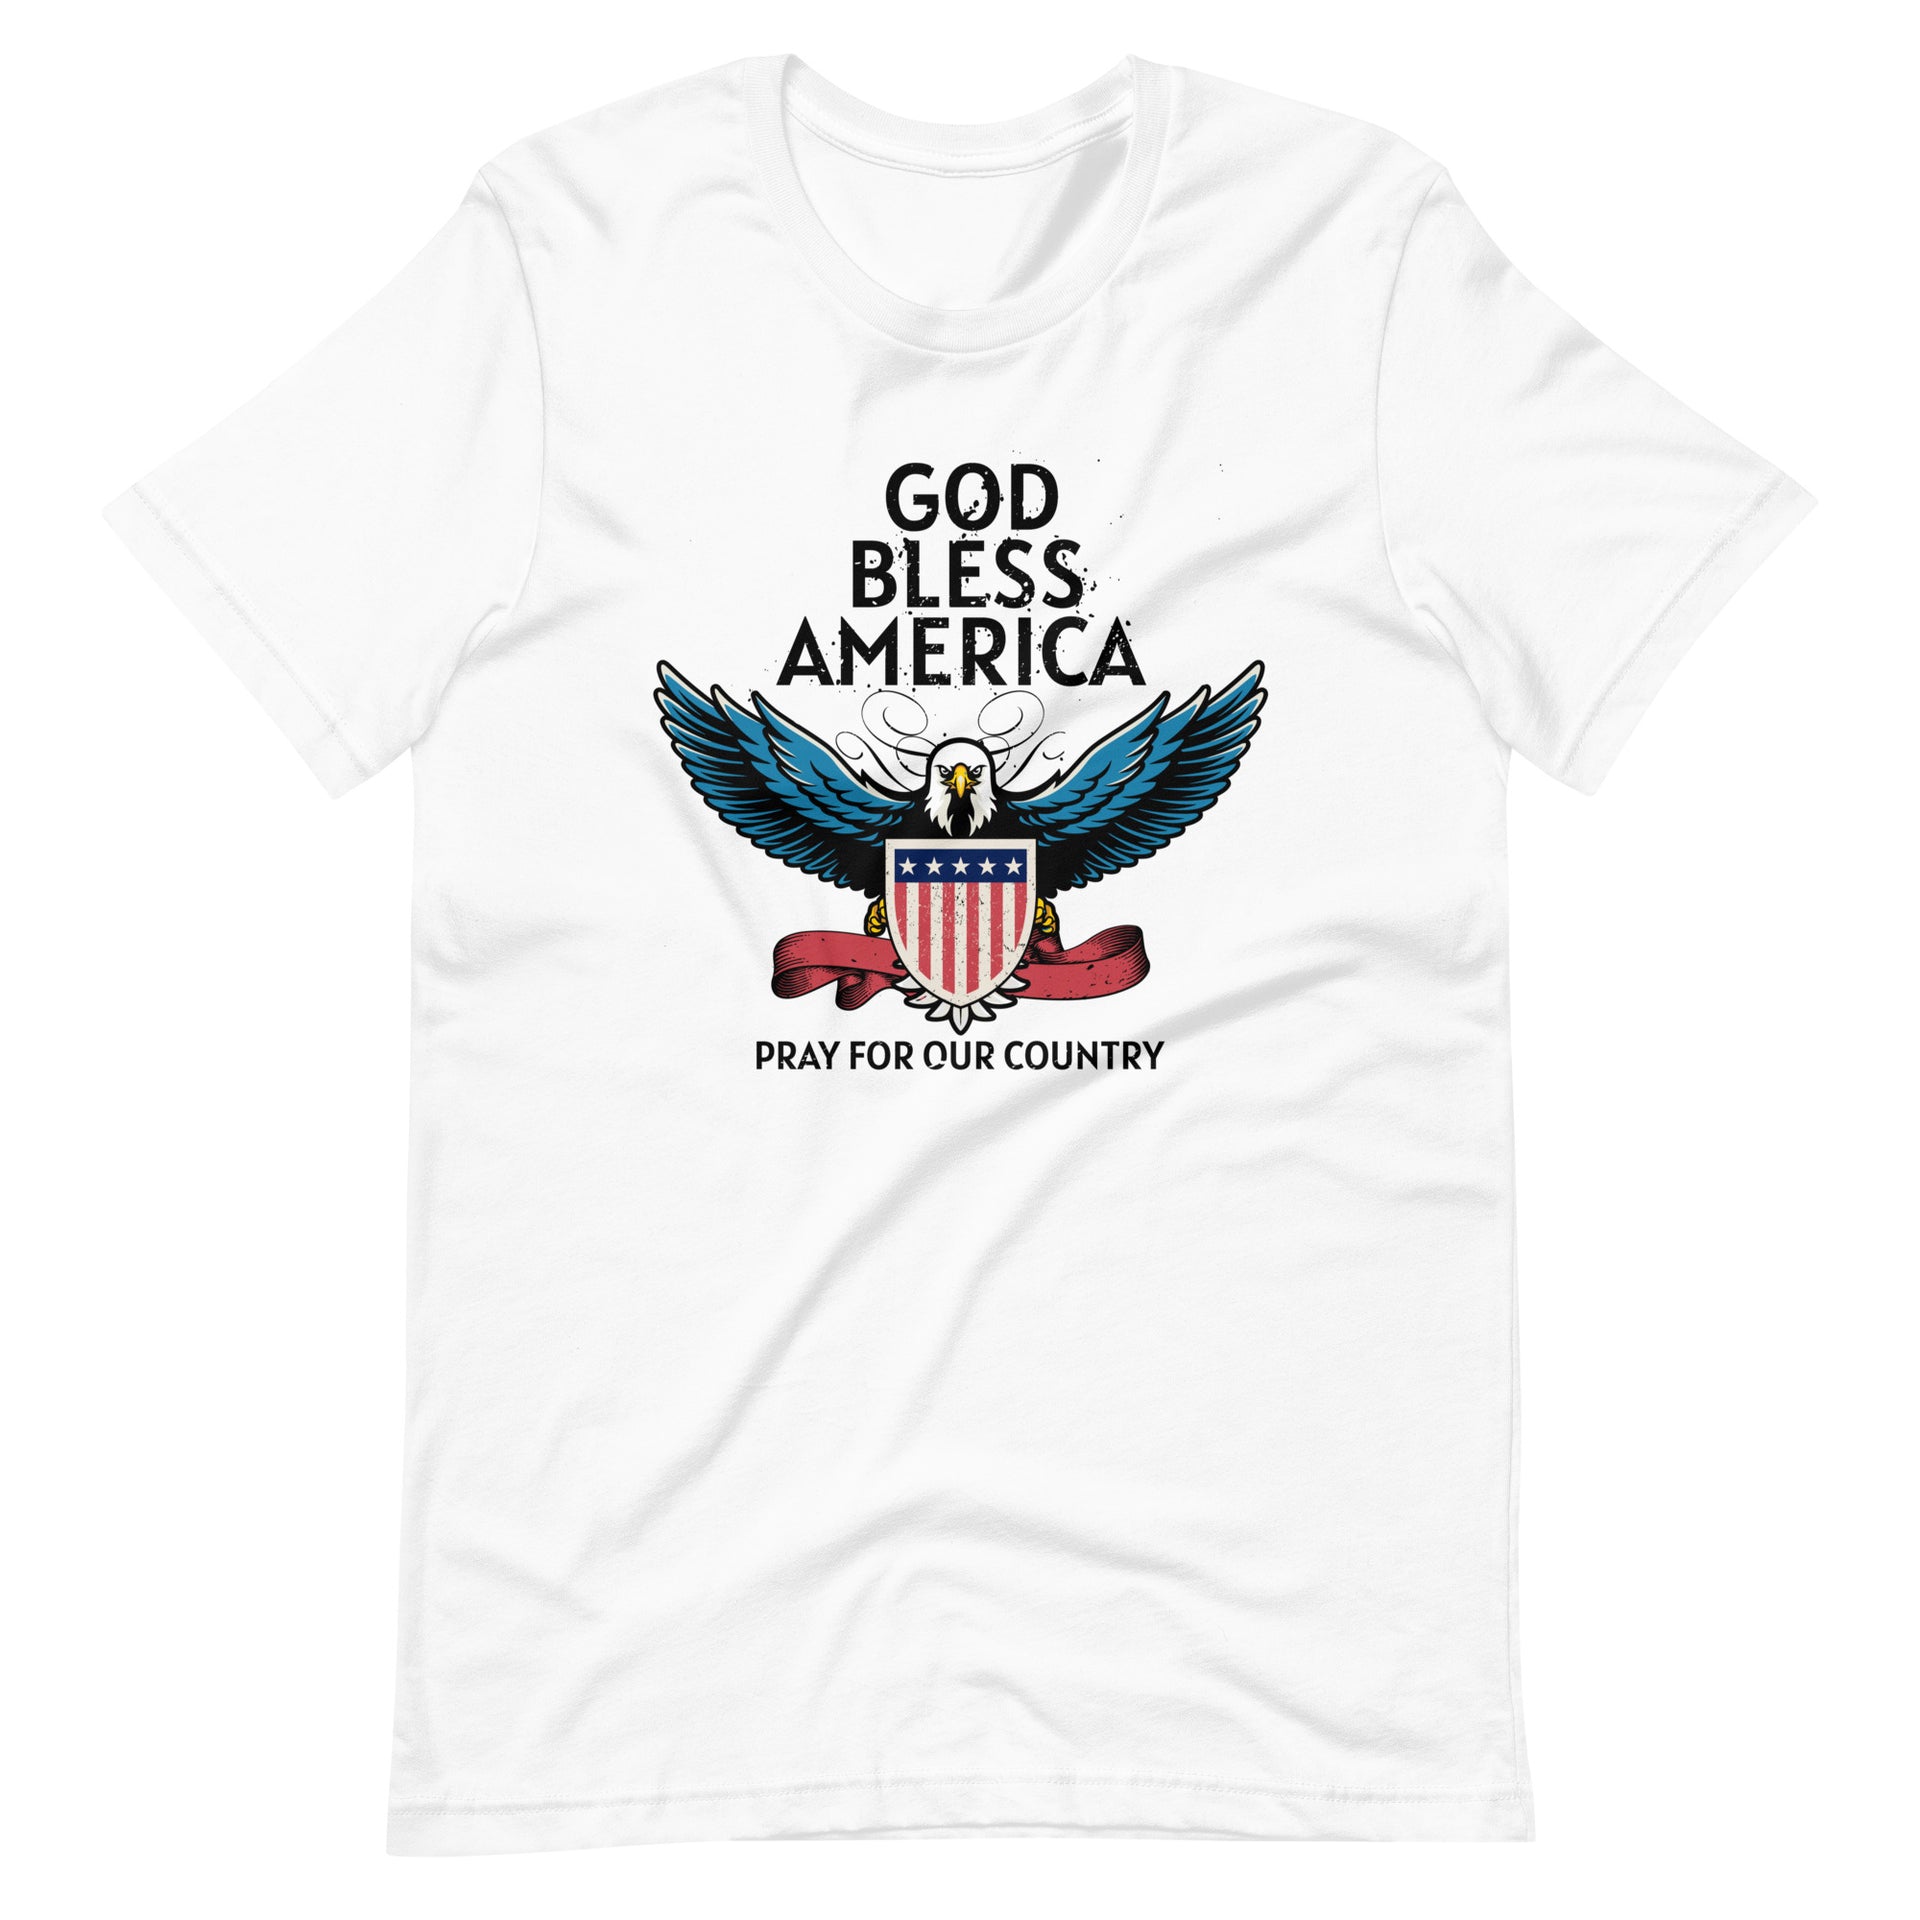 God Bless America Pray for Our Country Unisex t-shirt